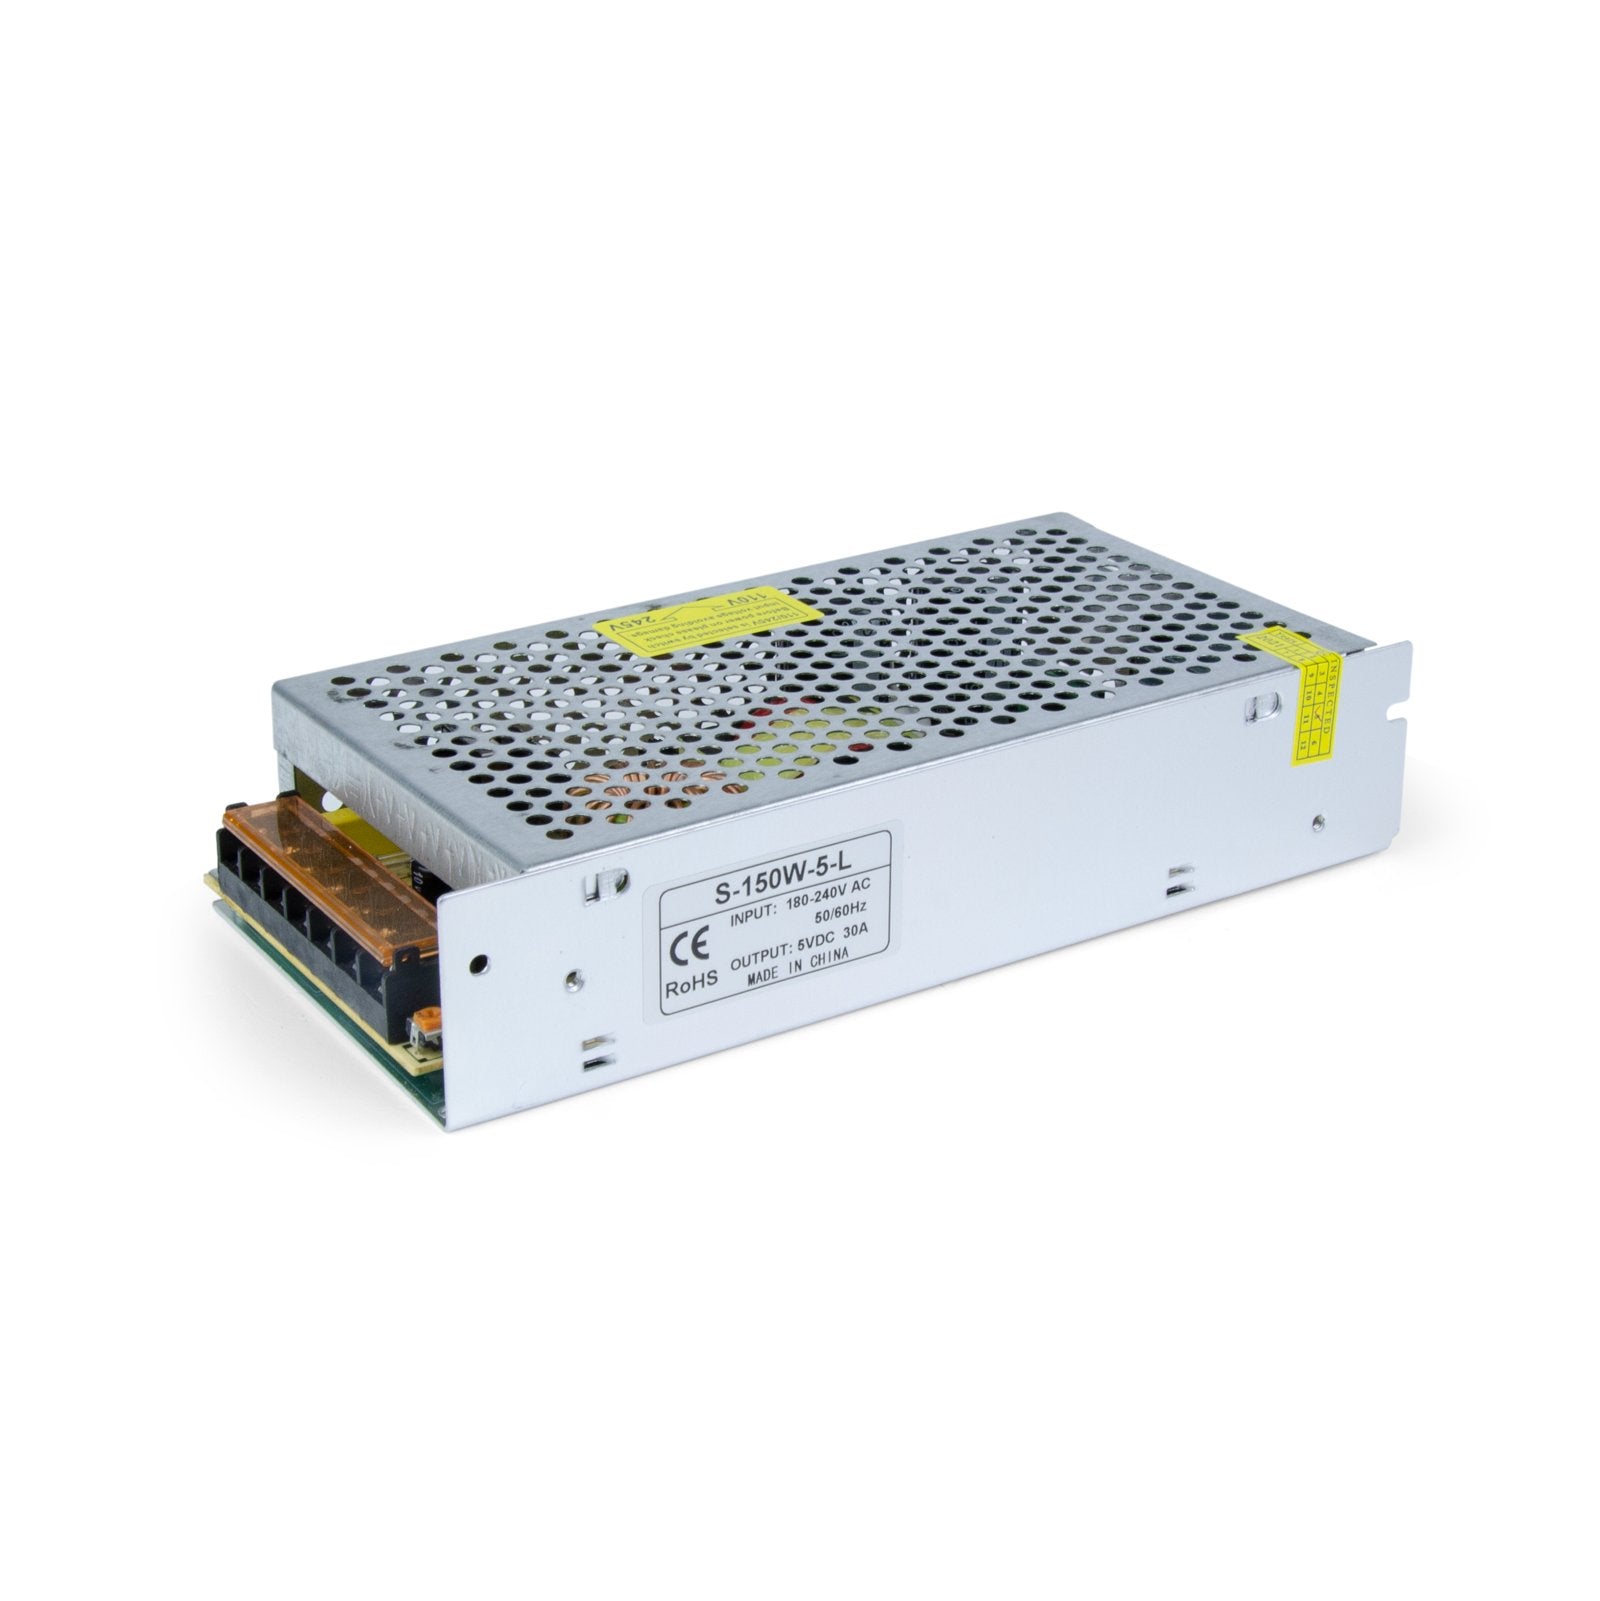 G.W.S LED Wholesale LED Drivers/LED Power Supplies IP20 (Non-Waterproof) 5V 30A 150W LED Driver